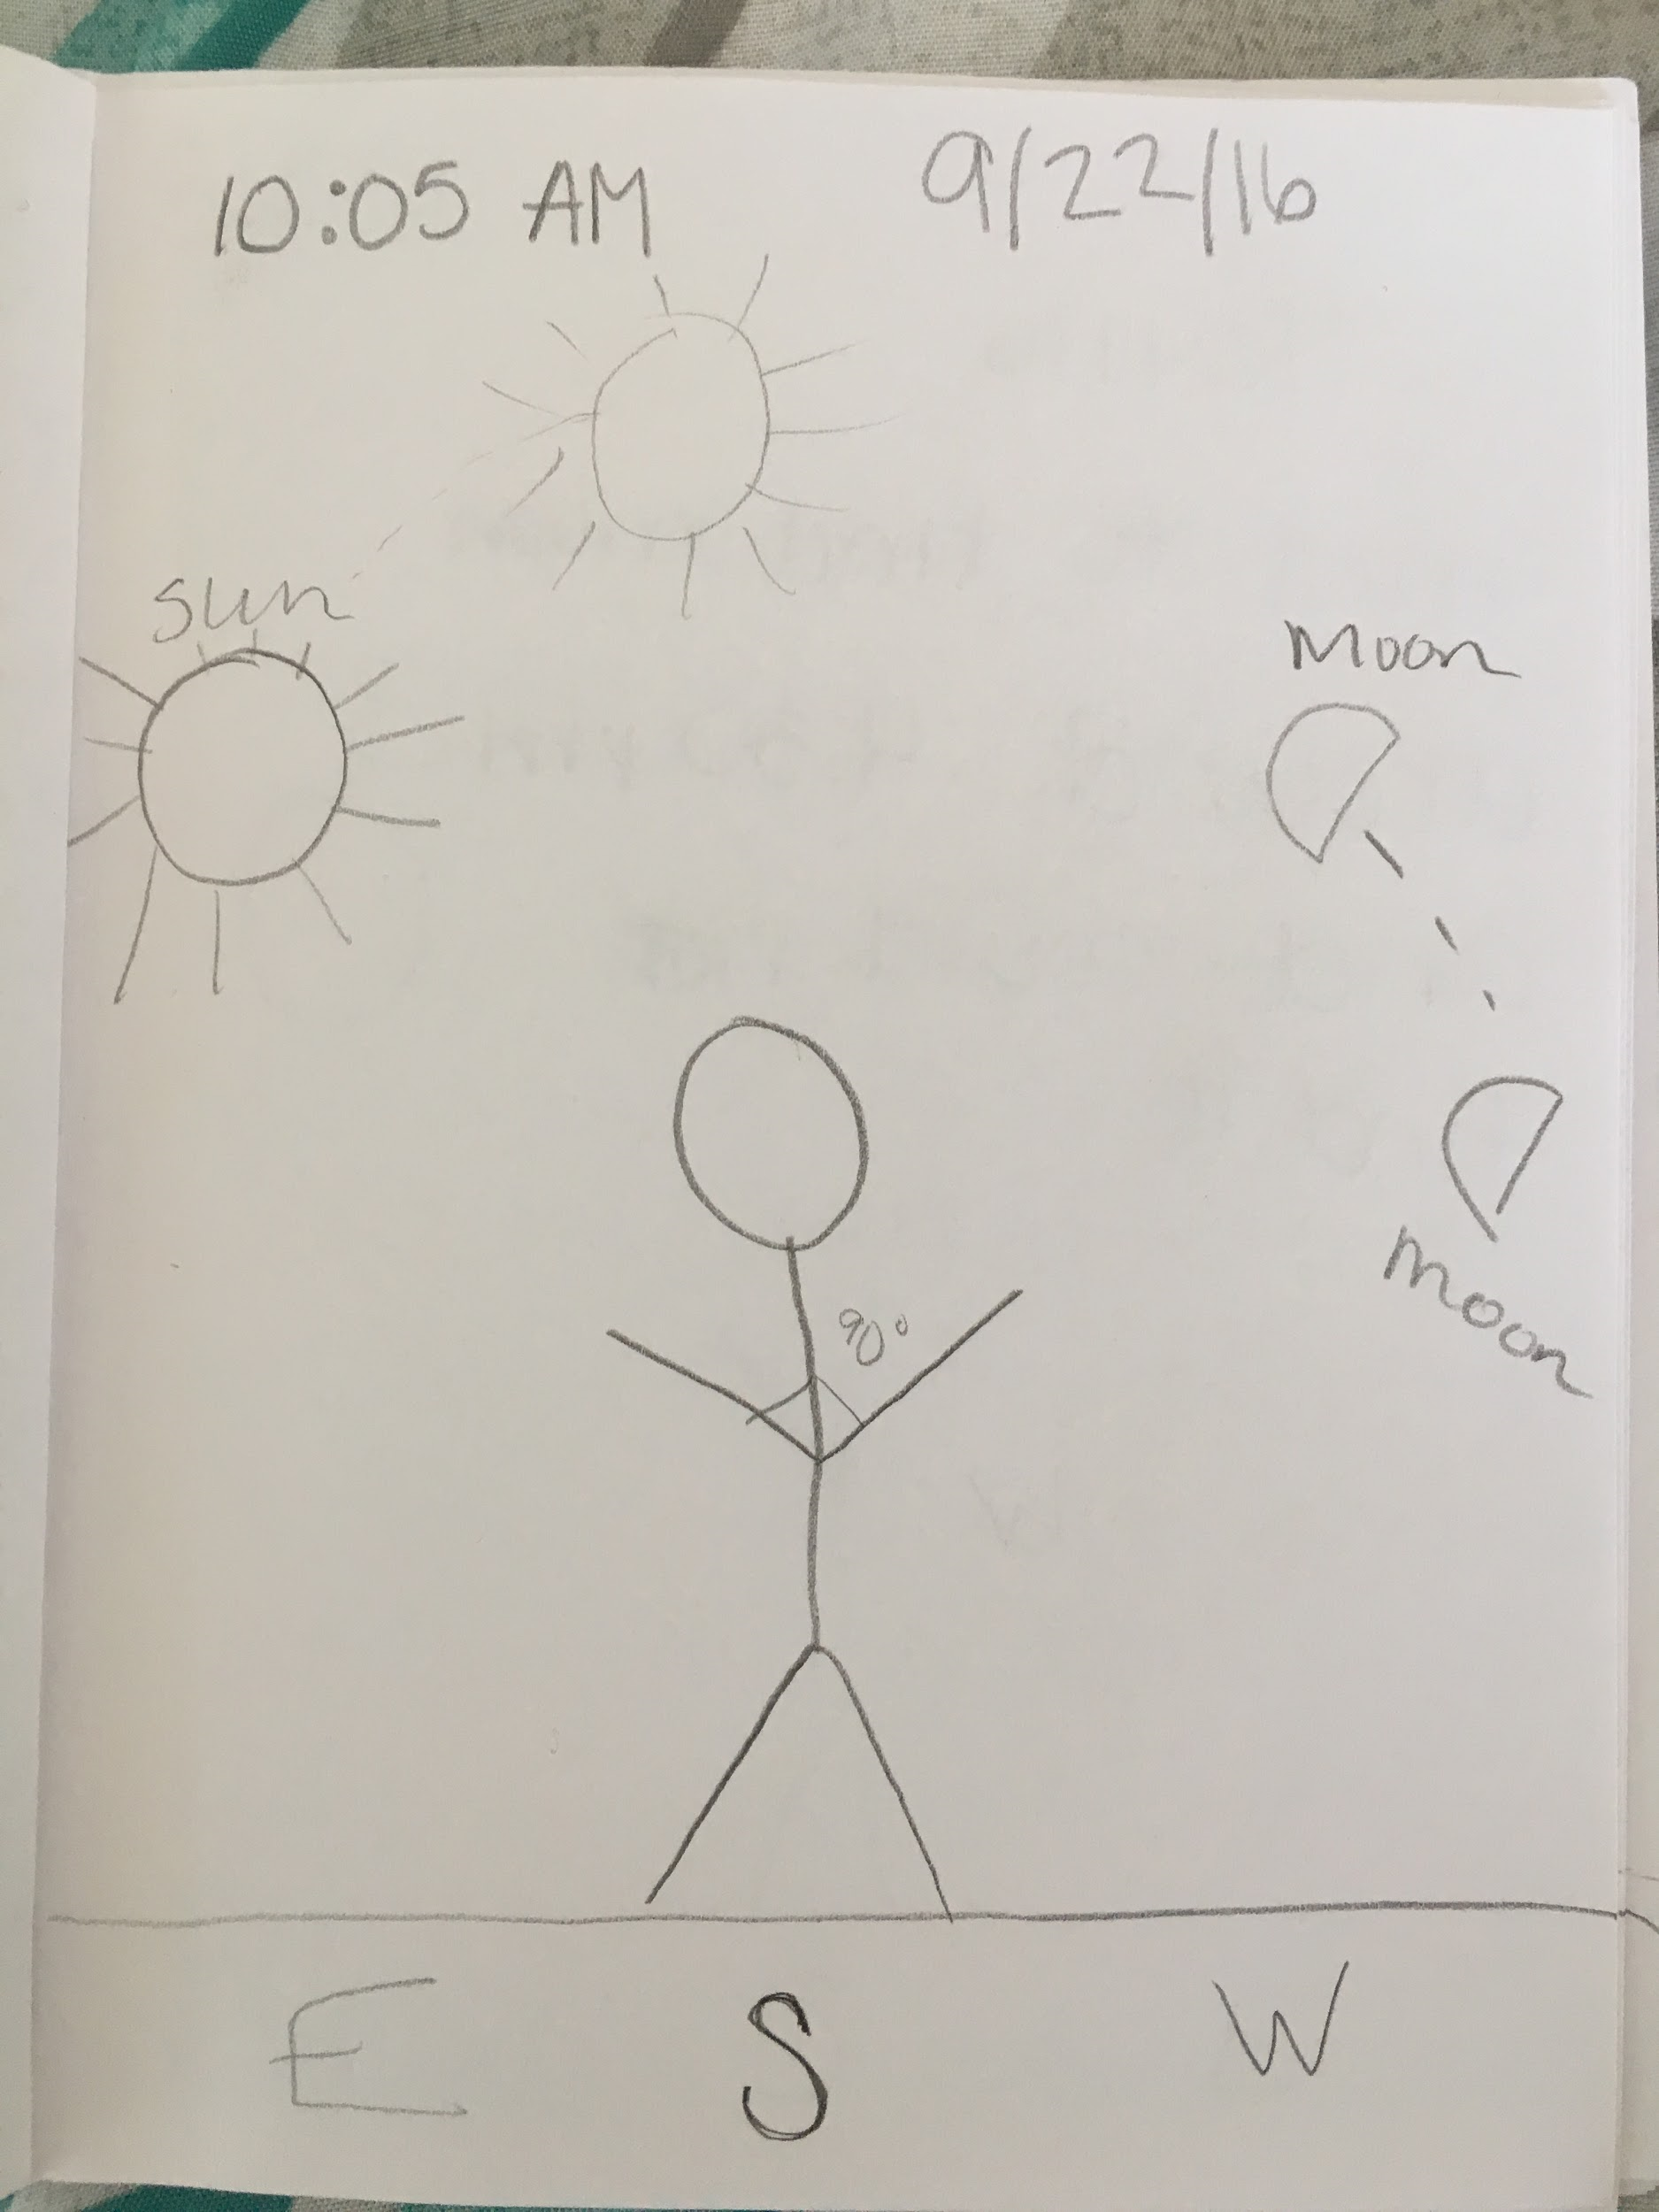 Student’s first observation of the sky with predictions for later in the day.